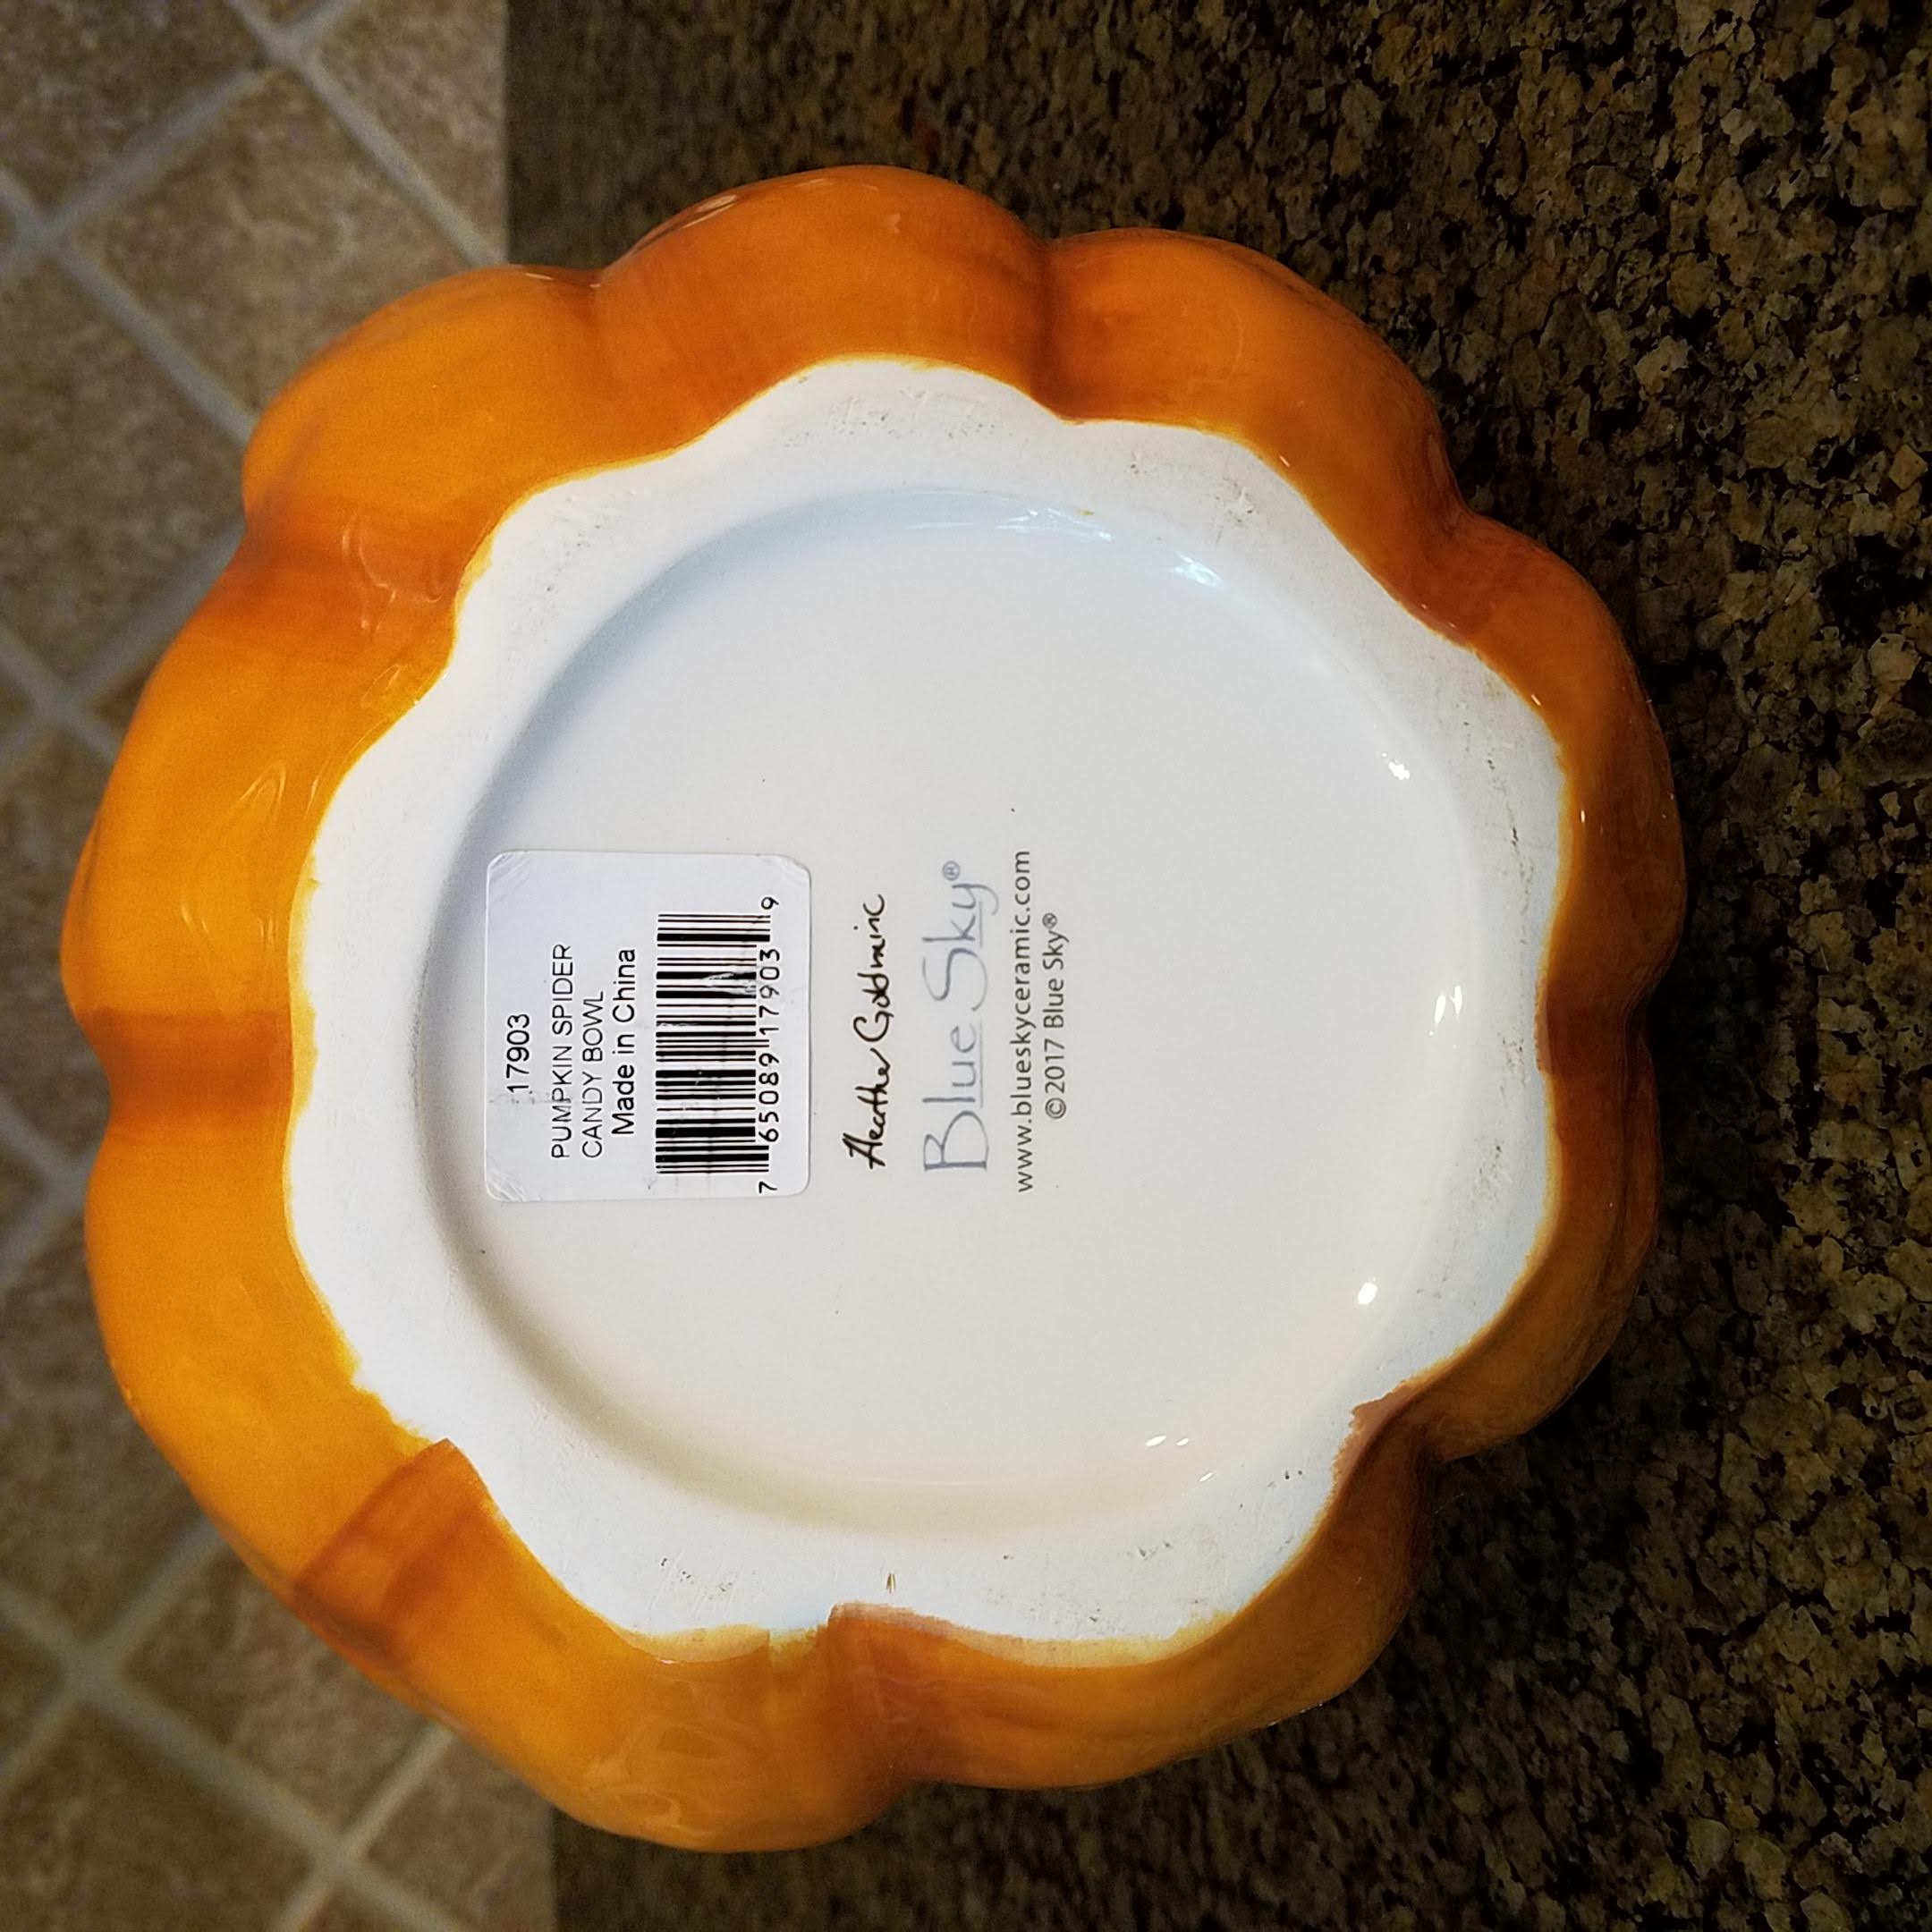 This Pumpkin Halloween Spider Candy Bowl Ceramic Blue Sky Kitchen Decor Collectable is made with love by Premier Homegoods! Shop more unique gift ideas today with Spots Initiatives, the best way to support creators.